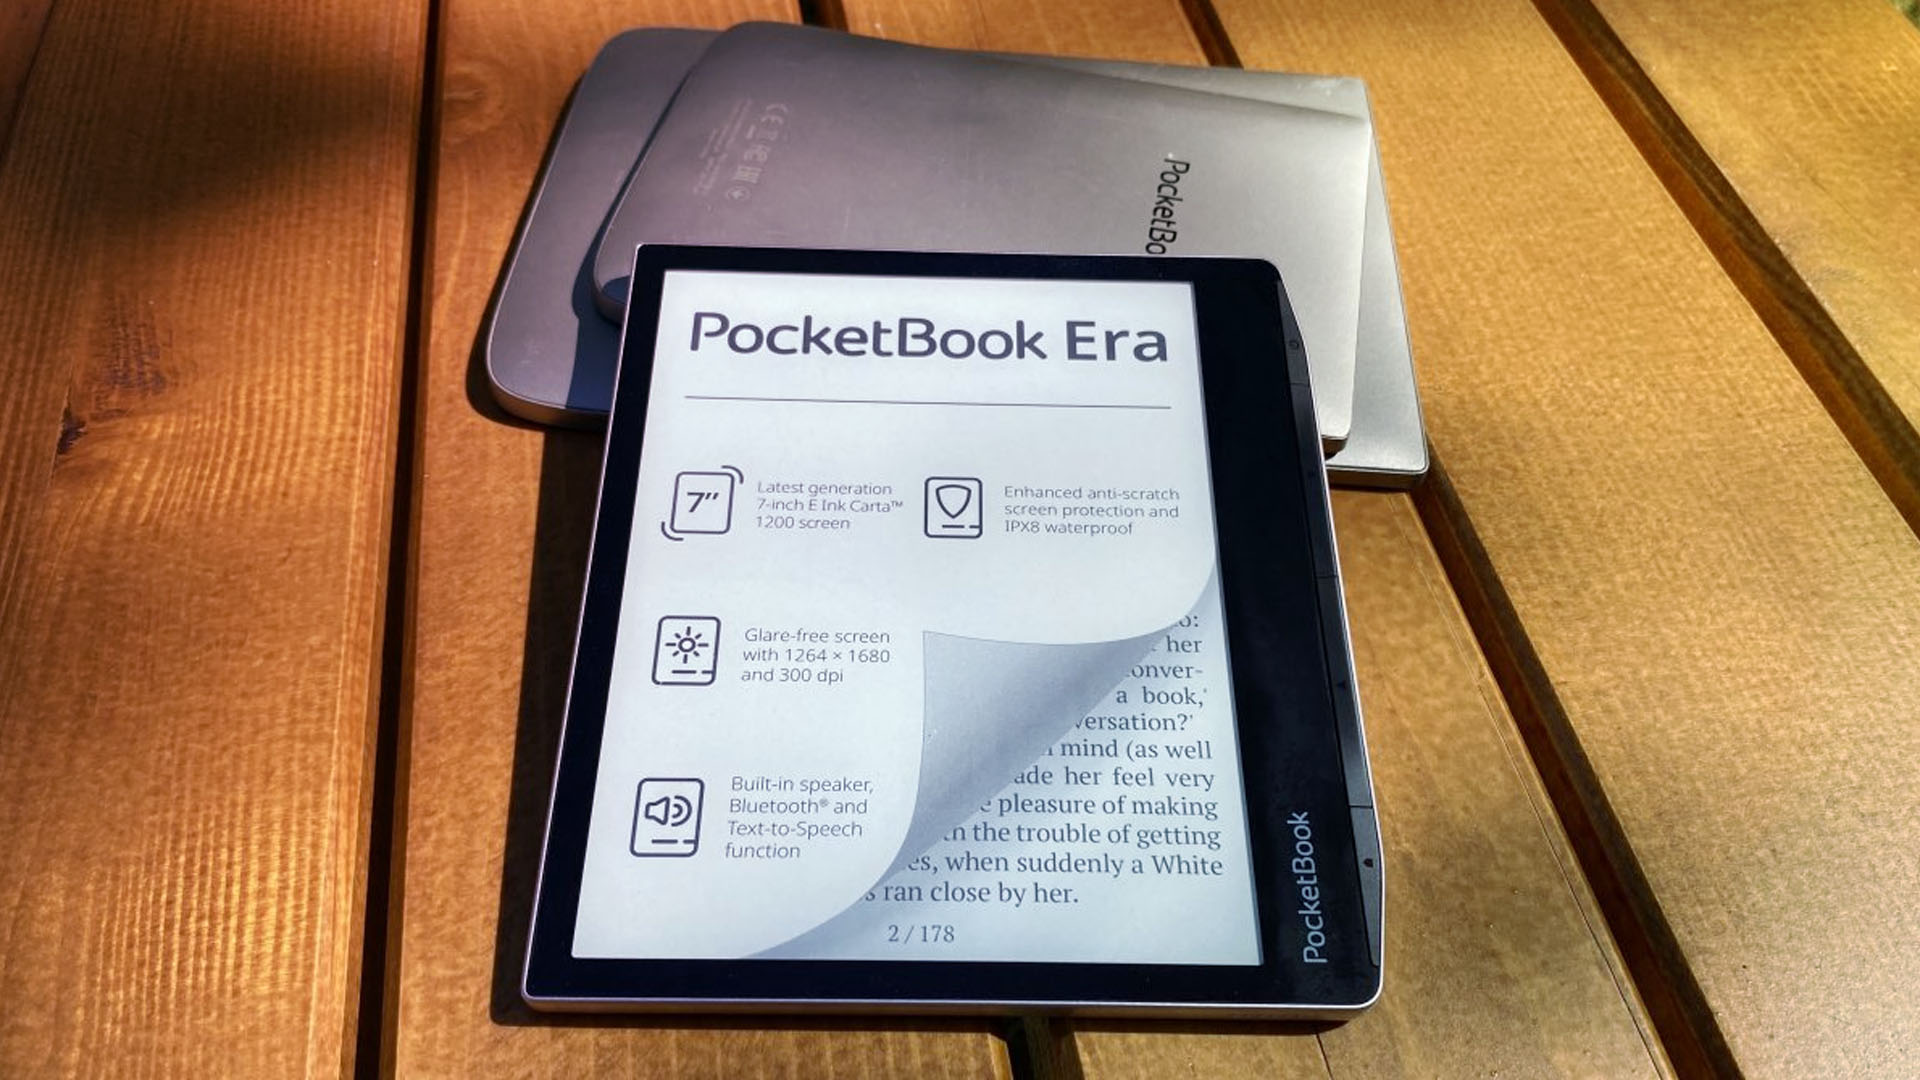 PocketBook Era: Price, Design, Performance and More Details - Daily  Research Plot